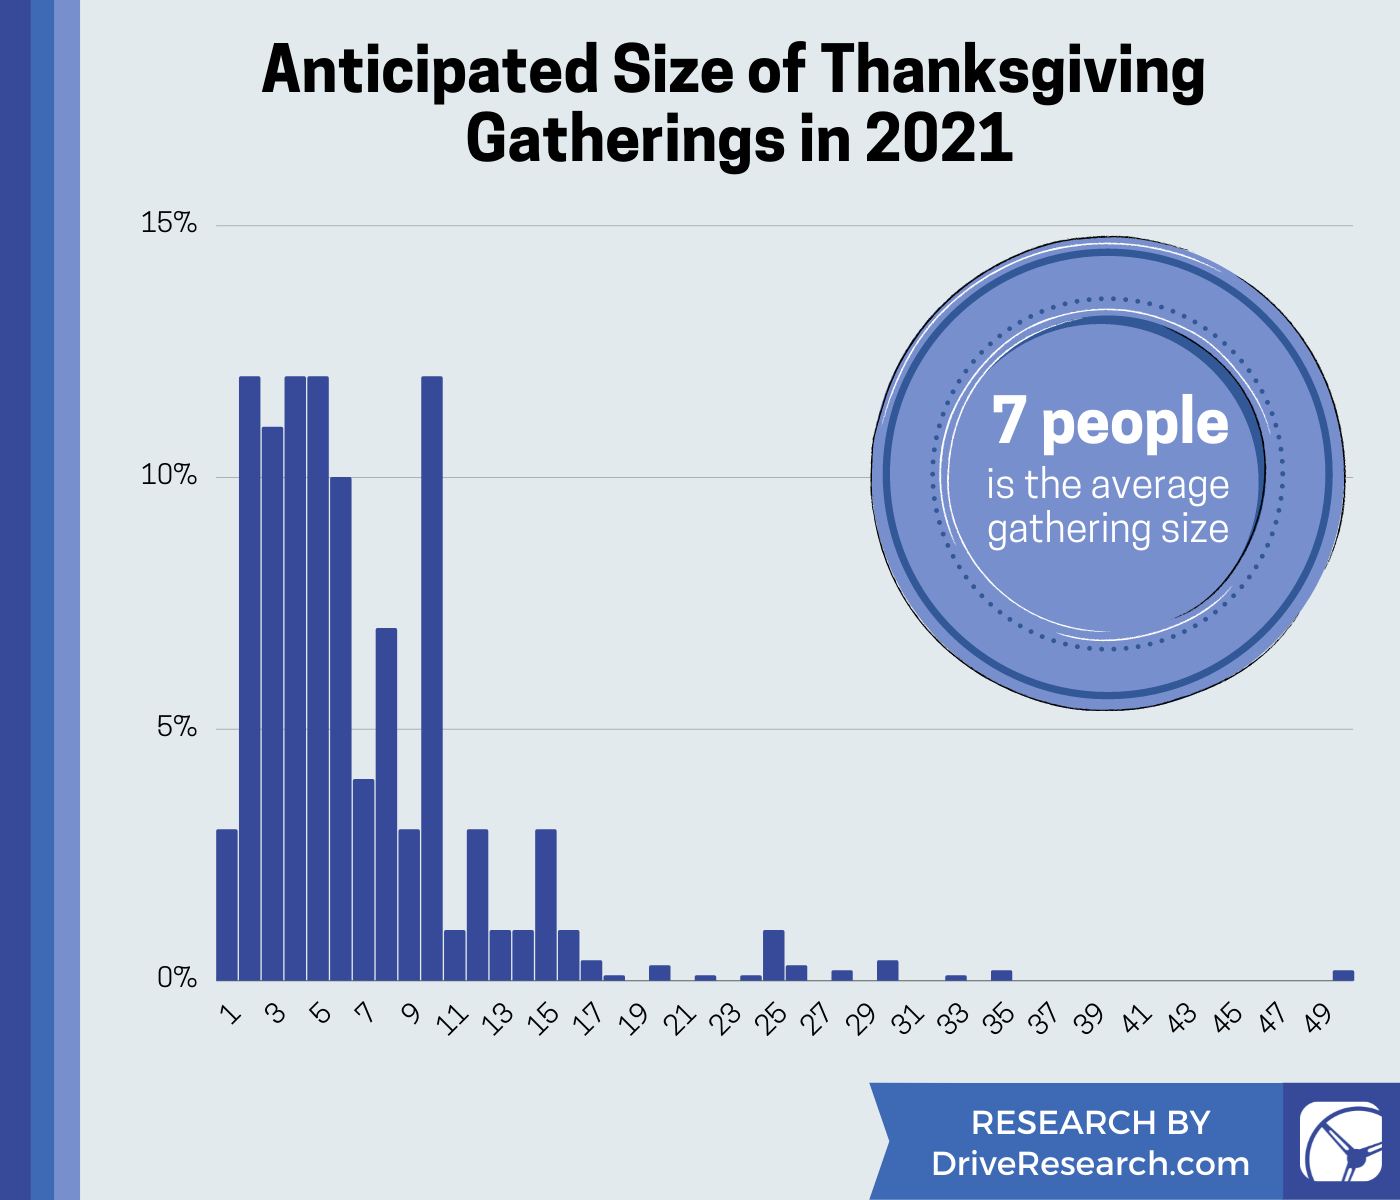 On average, U.S. consumers will celebrate Thanksgiving Day with 7 people.